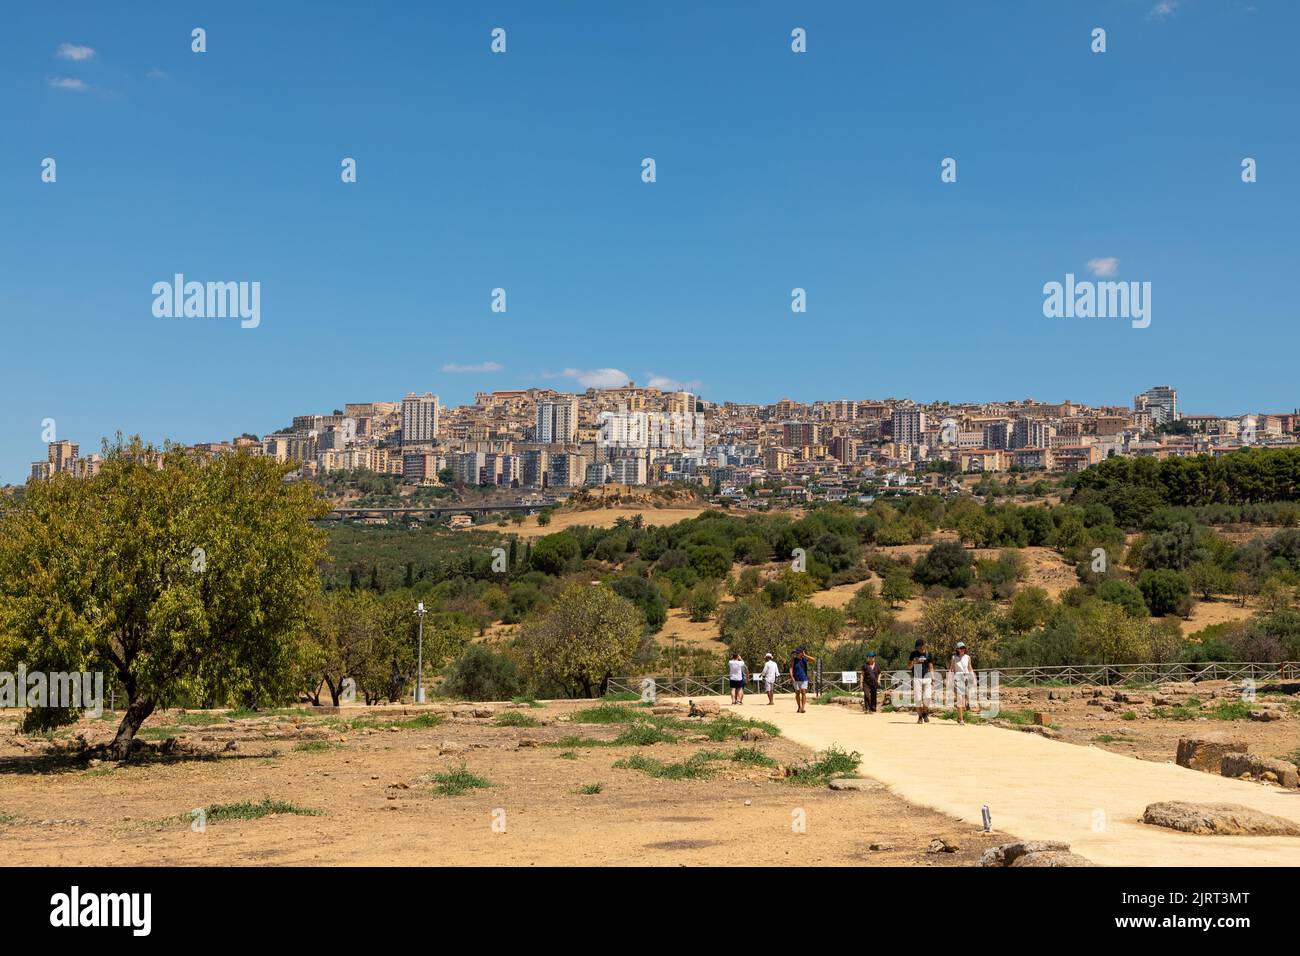 The hill top city of Agrigento overlooks the Valley of Temples archaeological site on Sicily, Italy. Stock Photo